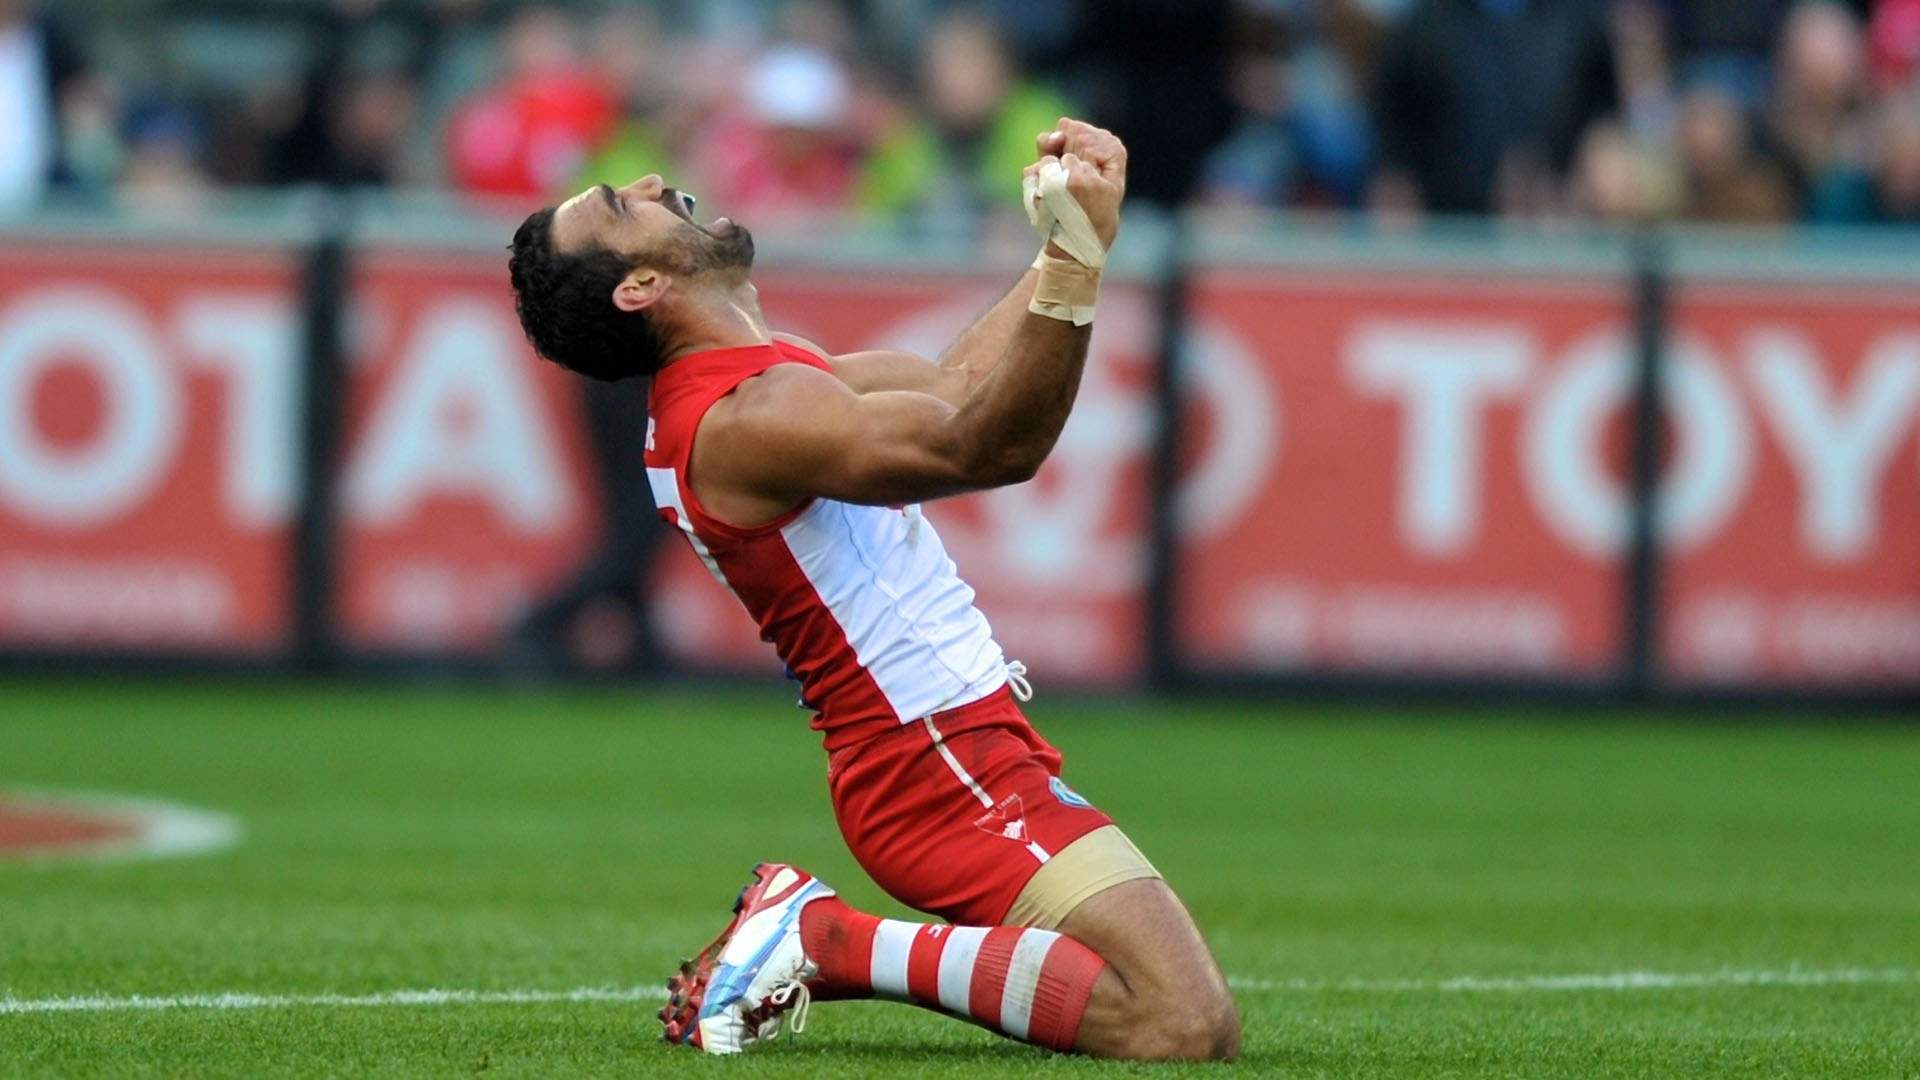 Stunning Adam Goodes Documentary 'The Final Quarter' Received a Standing Ovation at Its World Premiere